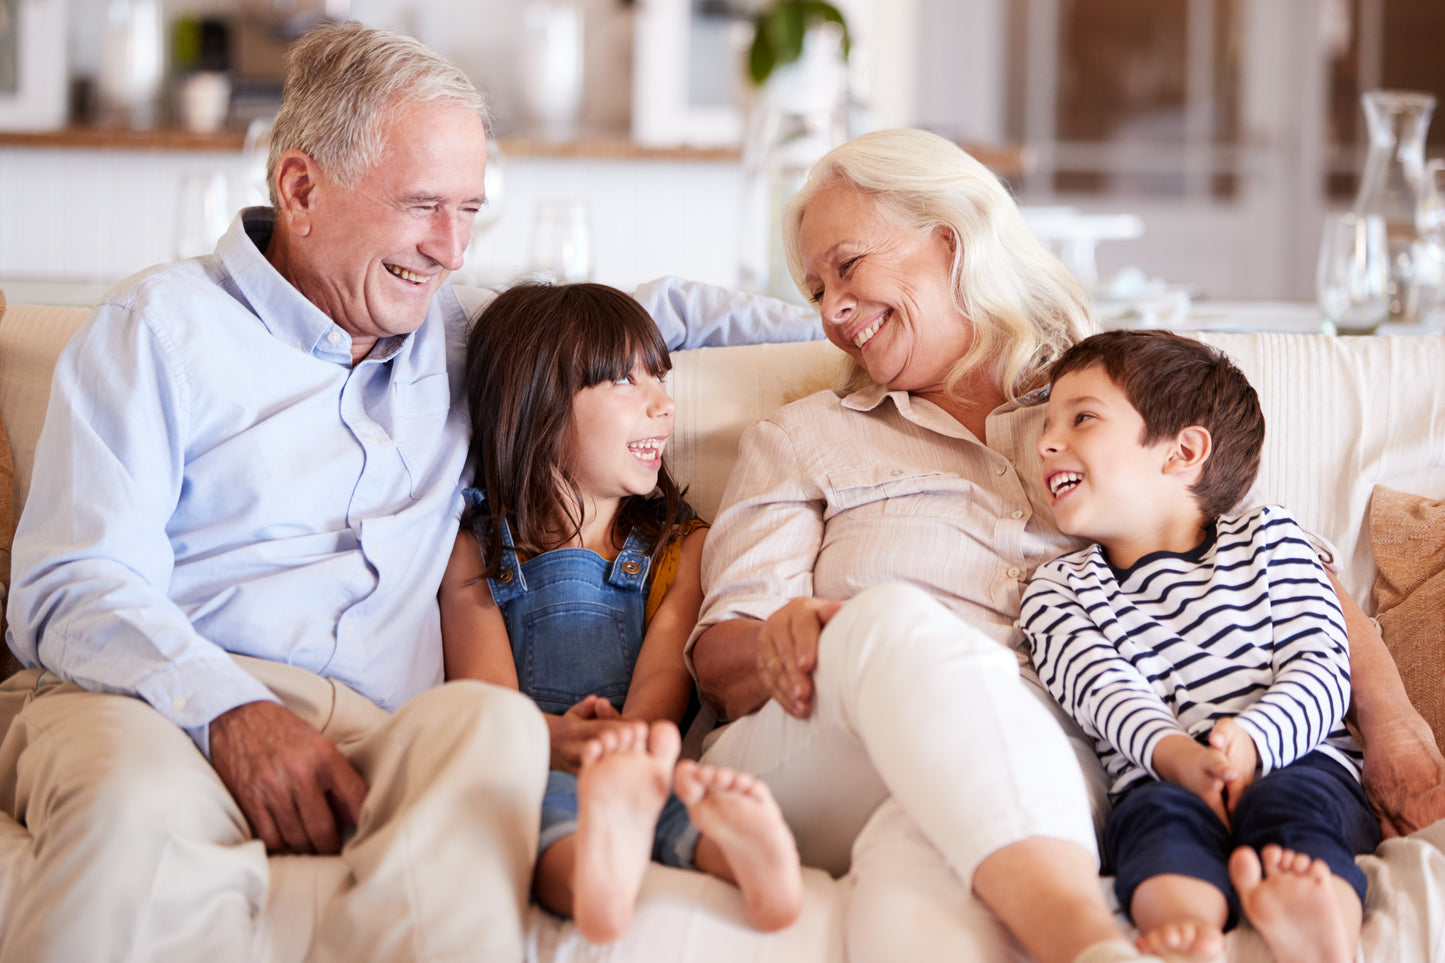 Grandfather and Grandmother sitting on a sofa with a granddaughter and grandson. All are enjoying a moment of happiness and connection. 